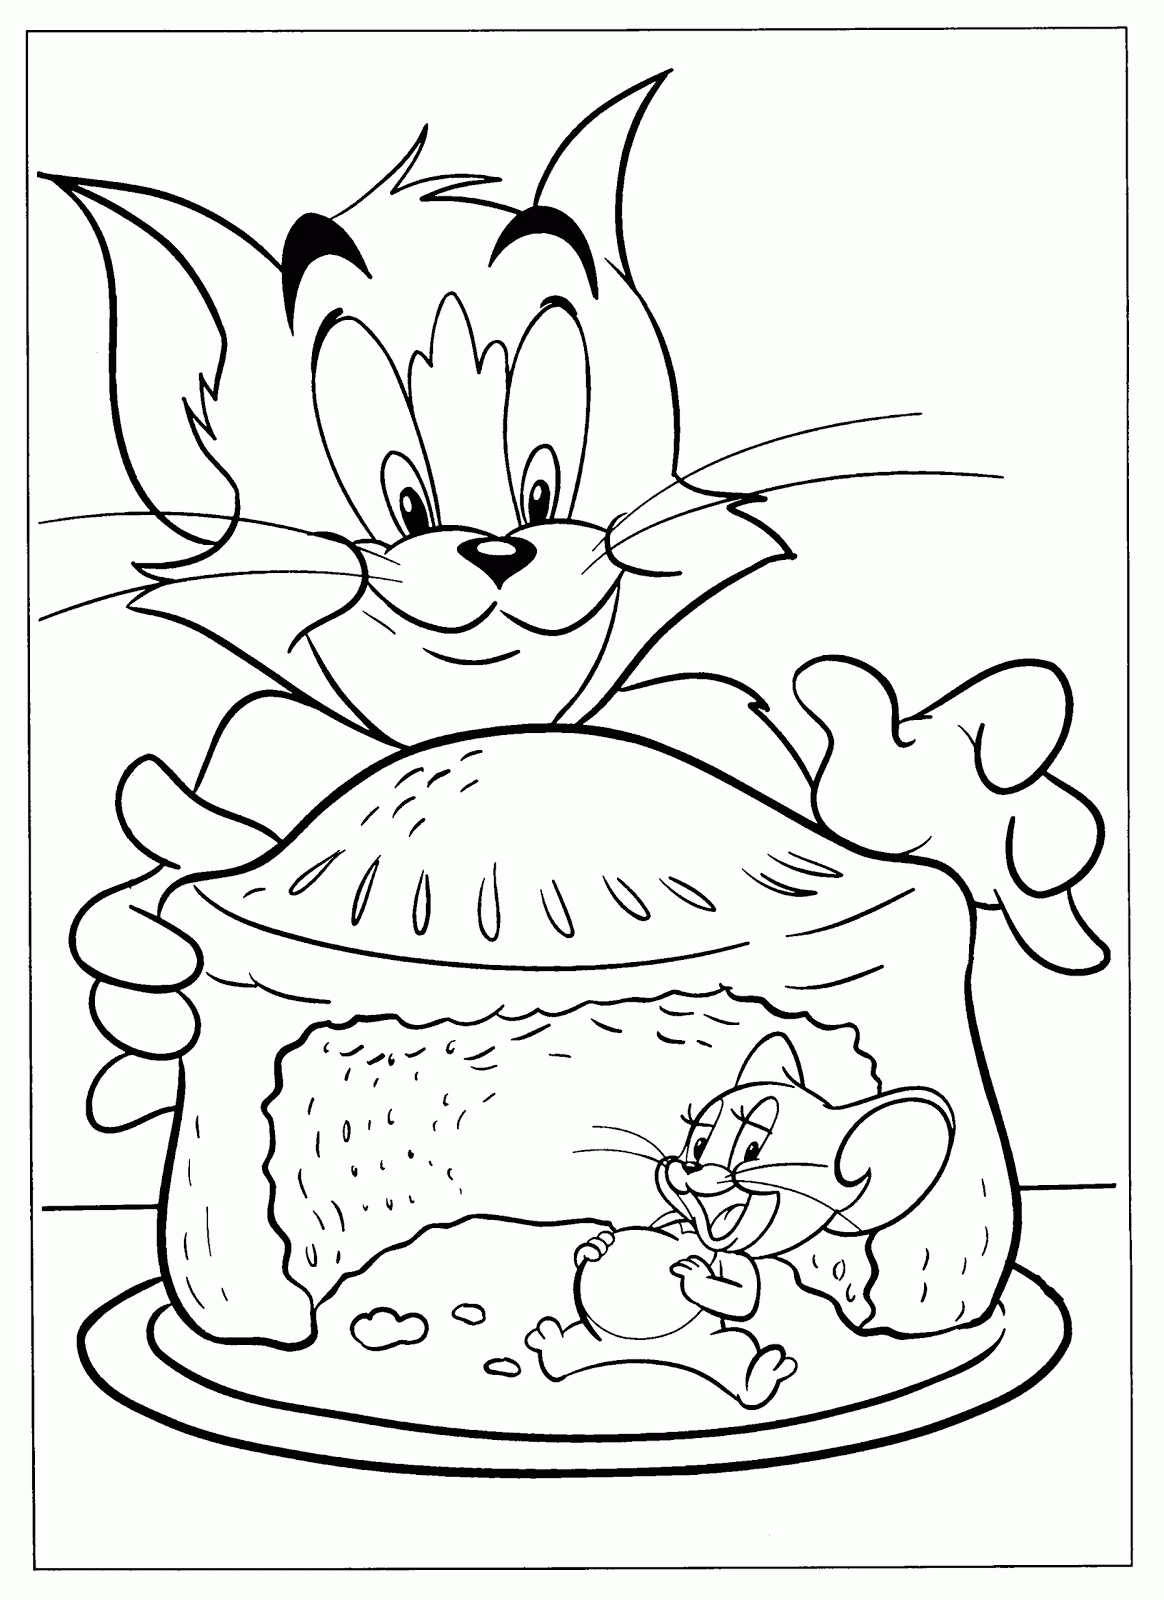 tom and jerry coloring pages | Minister Coloring